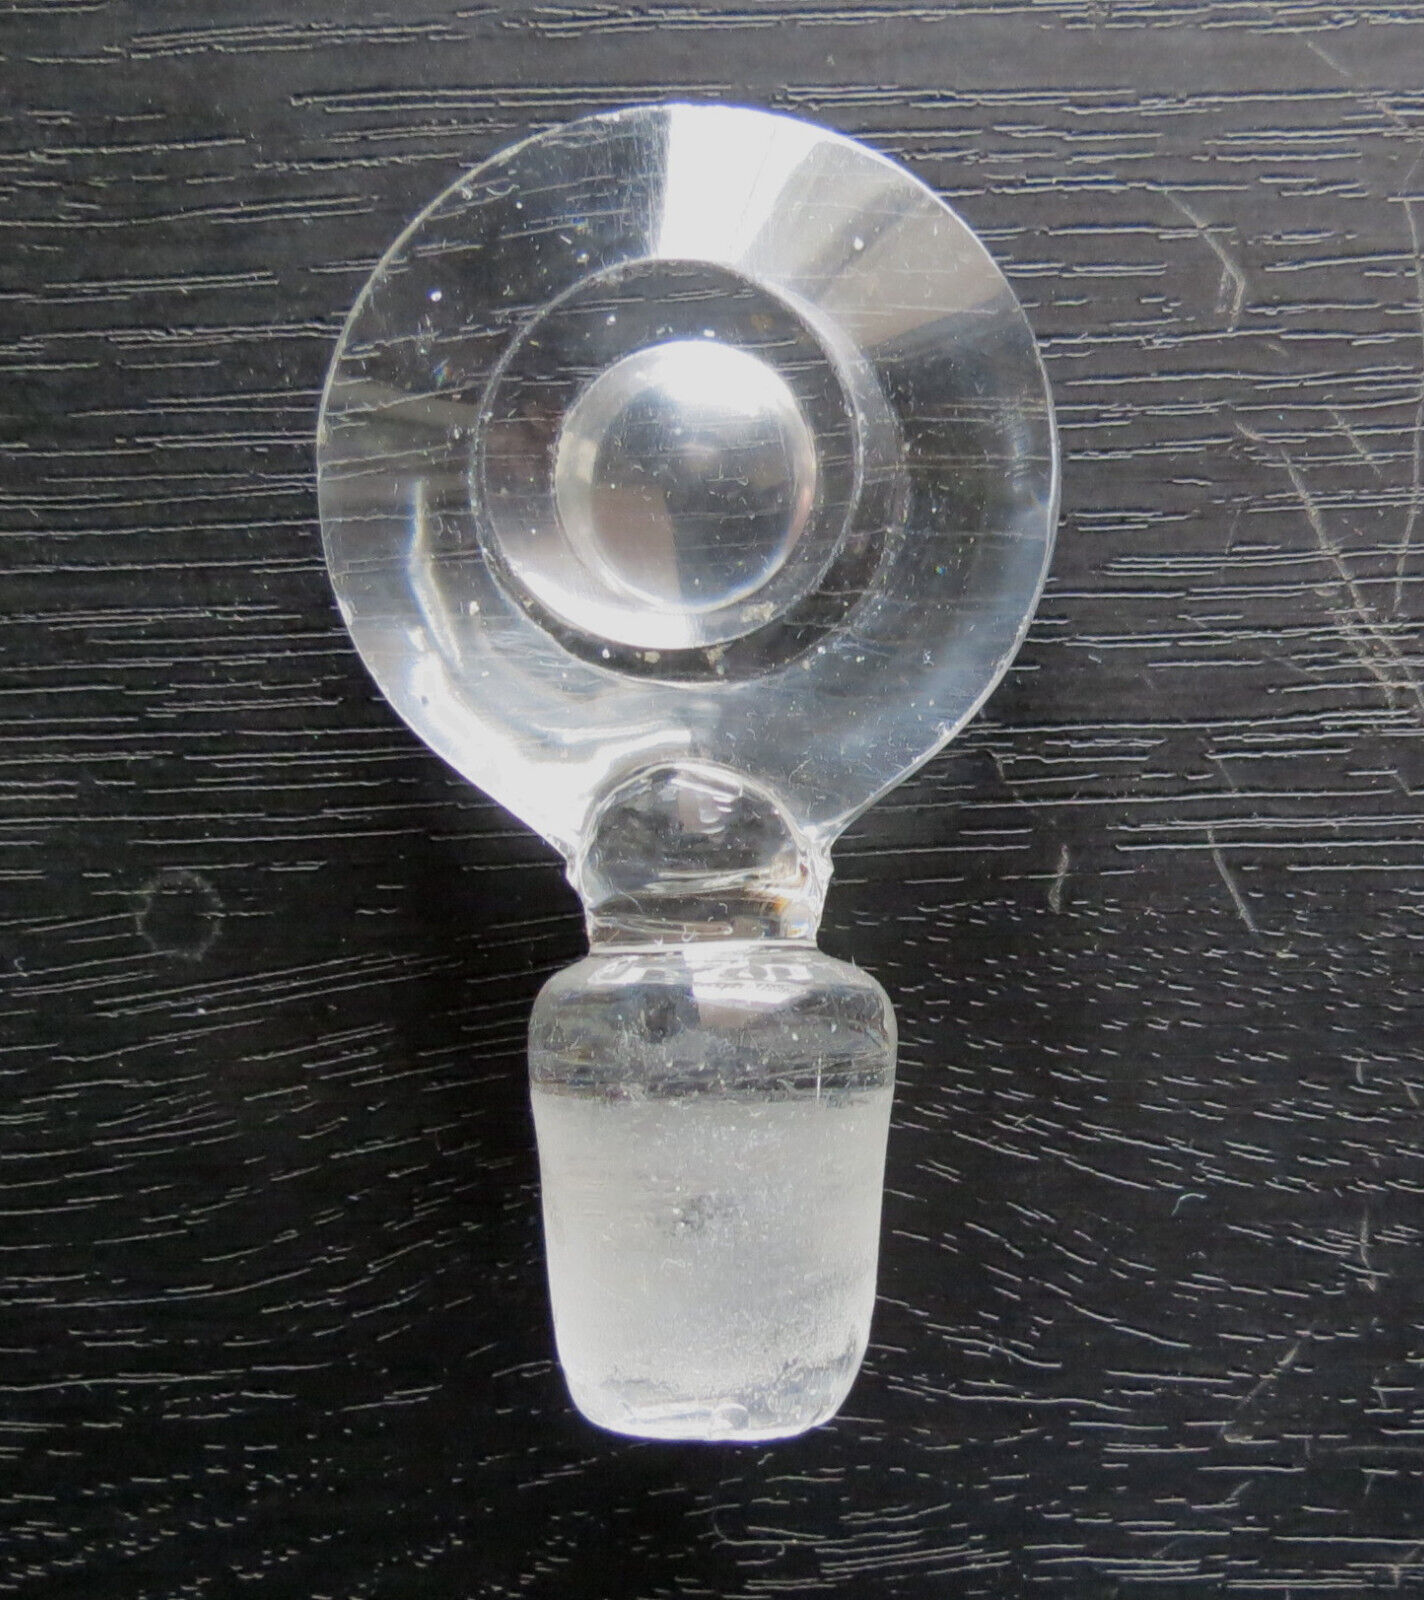 Early Crystal Decanter Stopper c 1790-1820